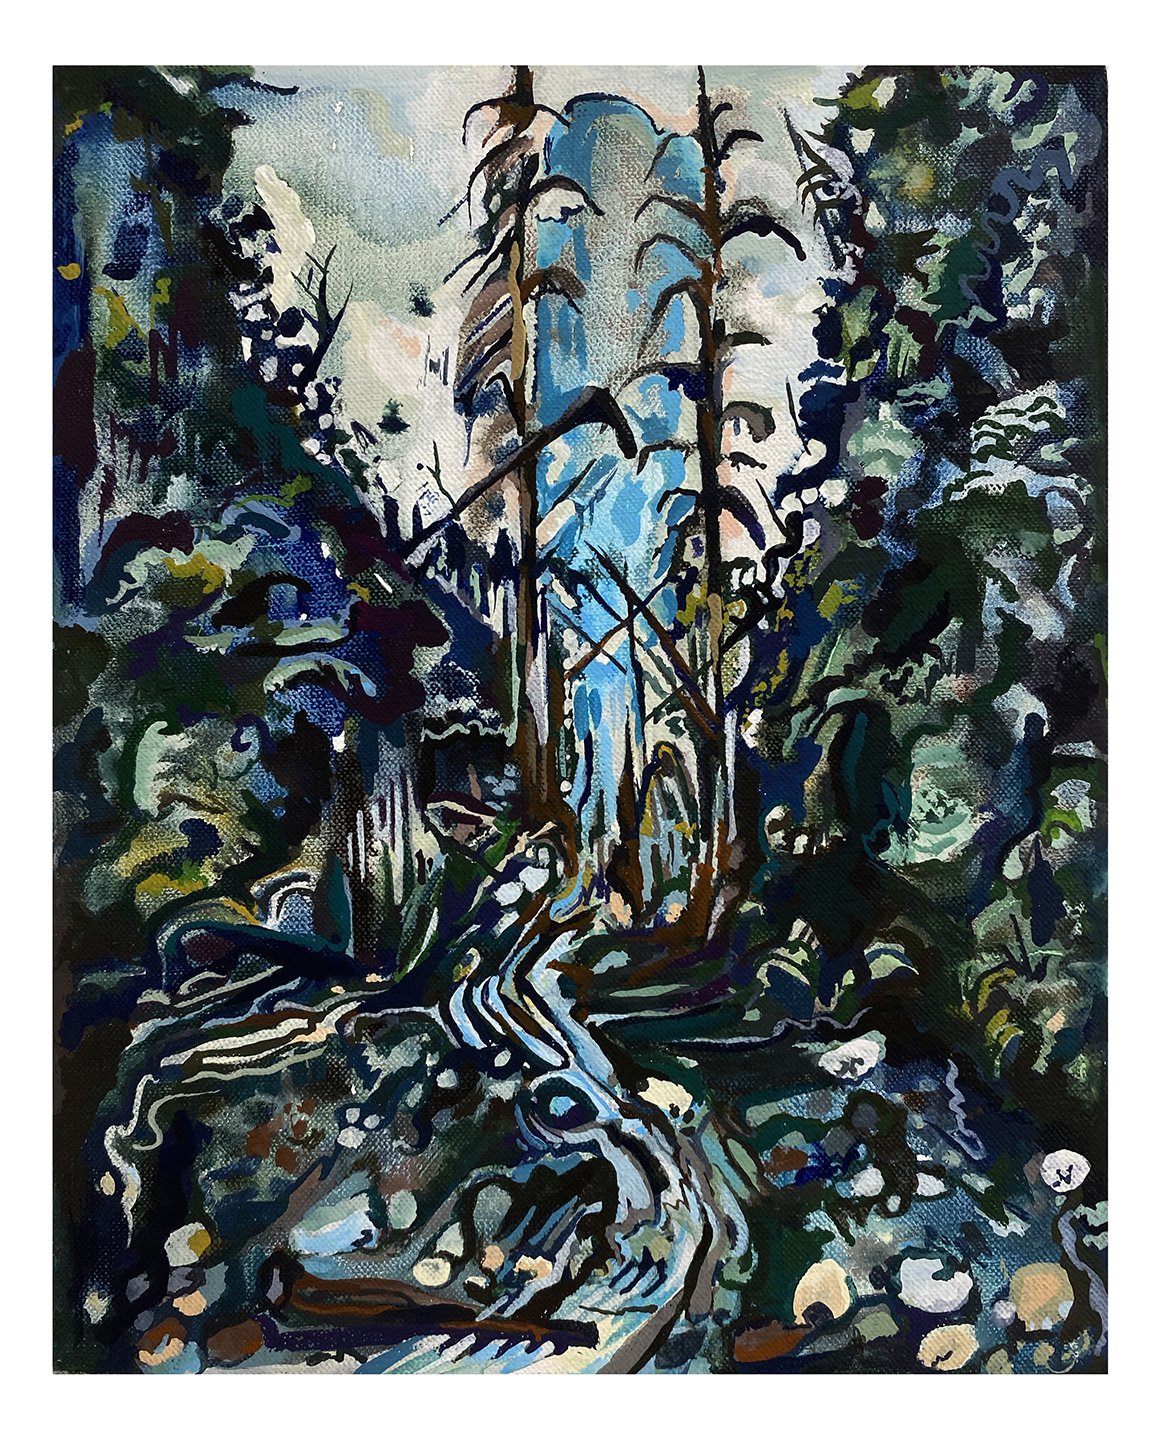  Maria Calandra, Fern Canyon at Prairie Creek, 2021, acrylic on linen over panel, 10 x 8 inches 